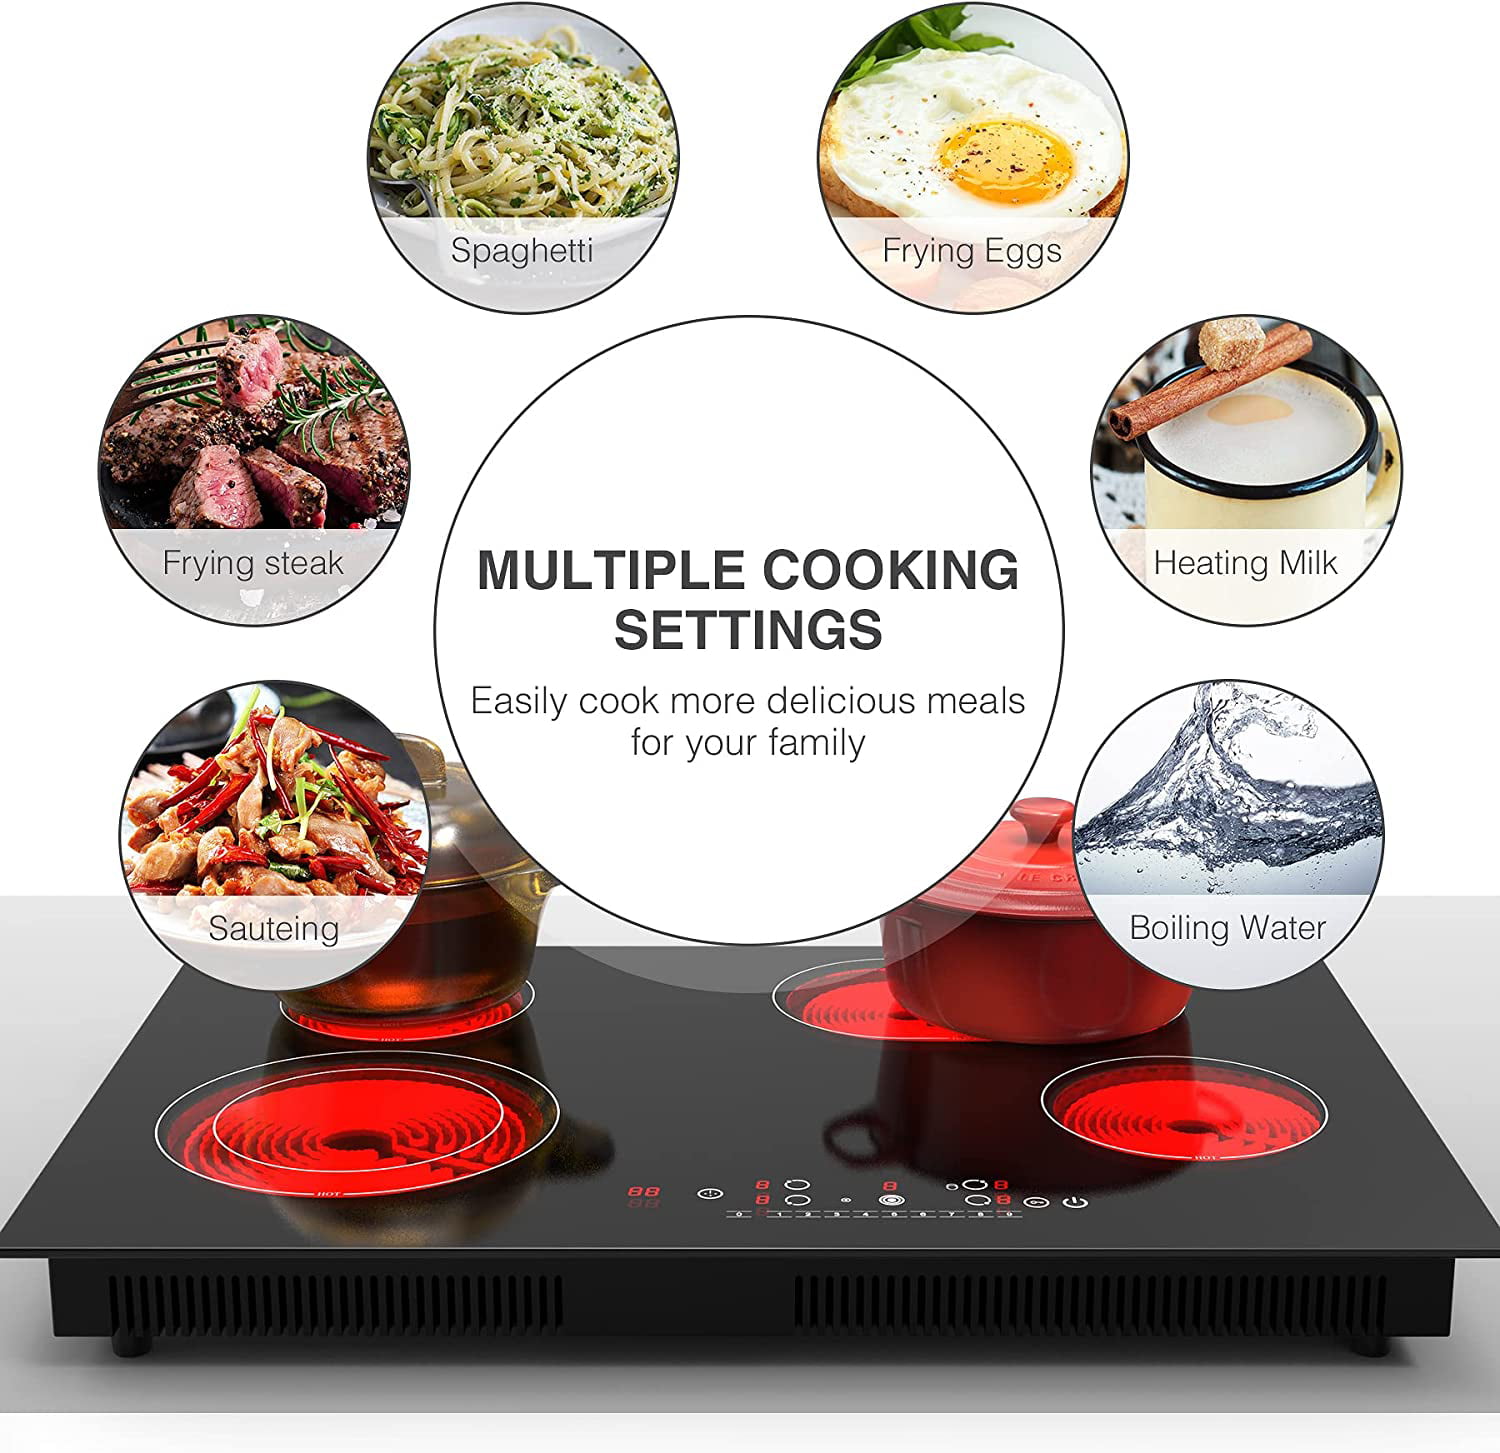 Electric Cooktop 30 inch, Electric Stove Top 4 Burner 7200W, POTFYA Build-in Electric Ceramic Cooktop for Cooking, 220-240V, Knob Control,No Plug